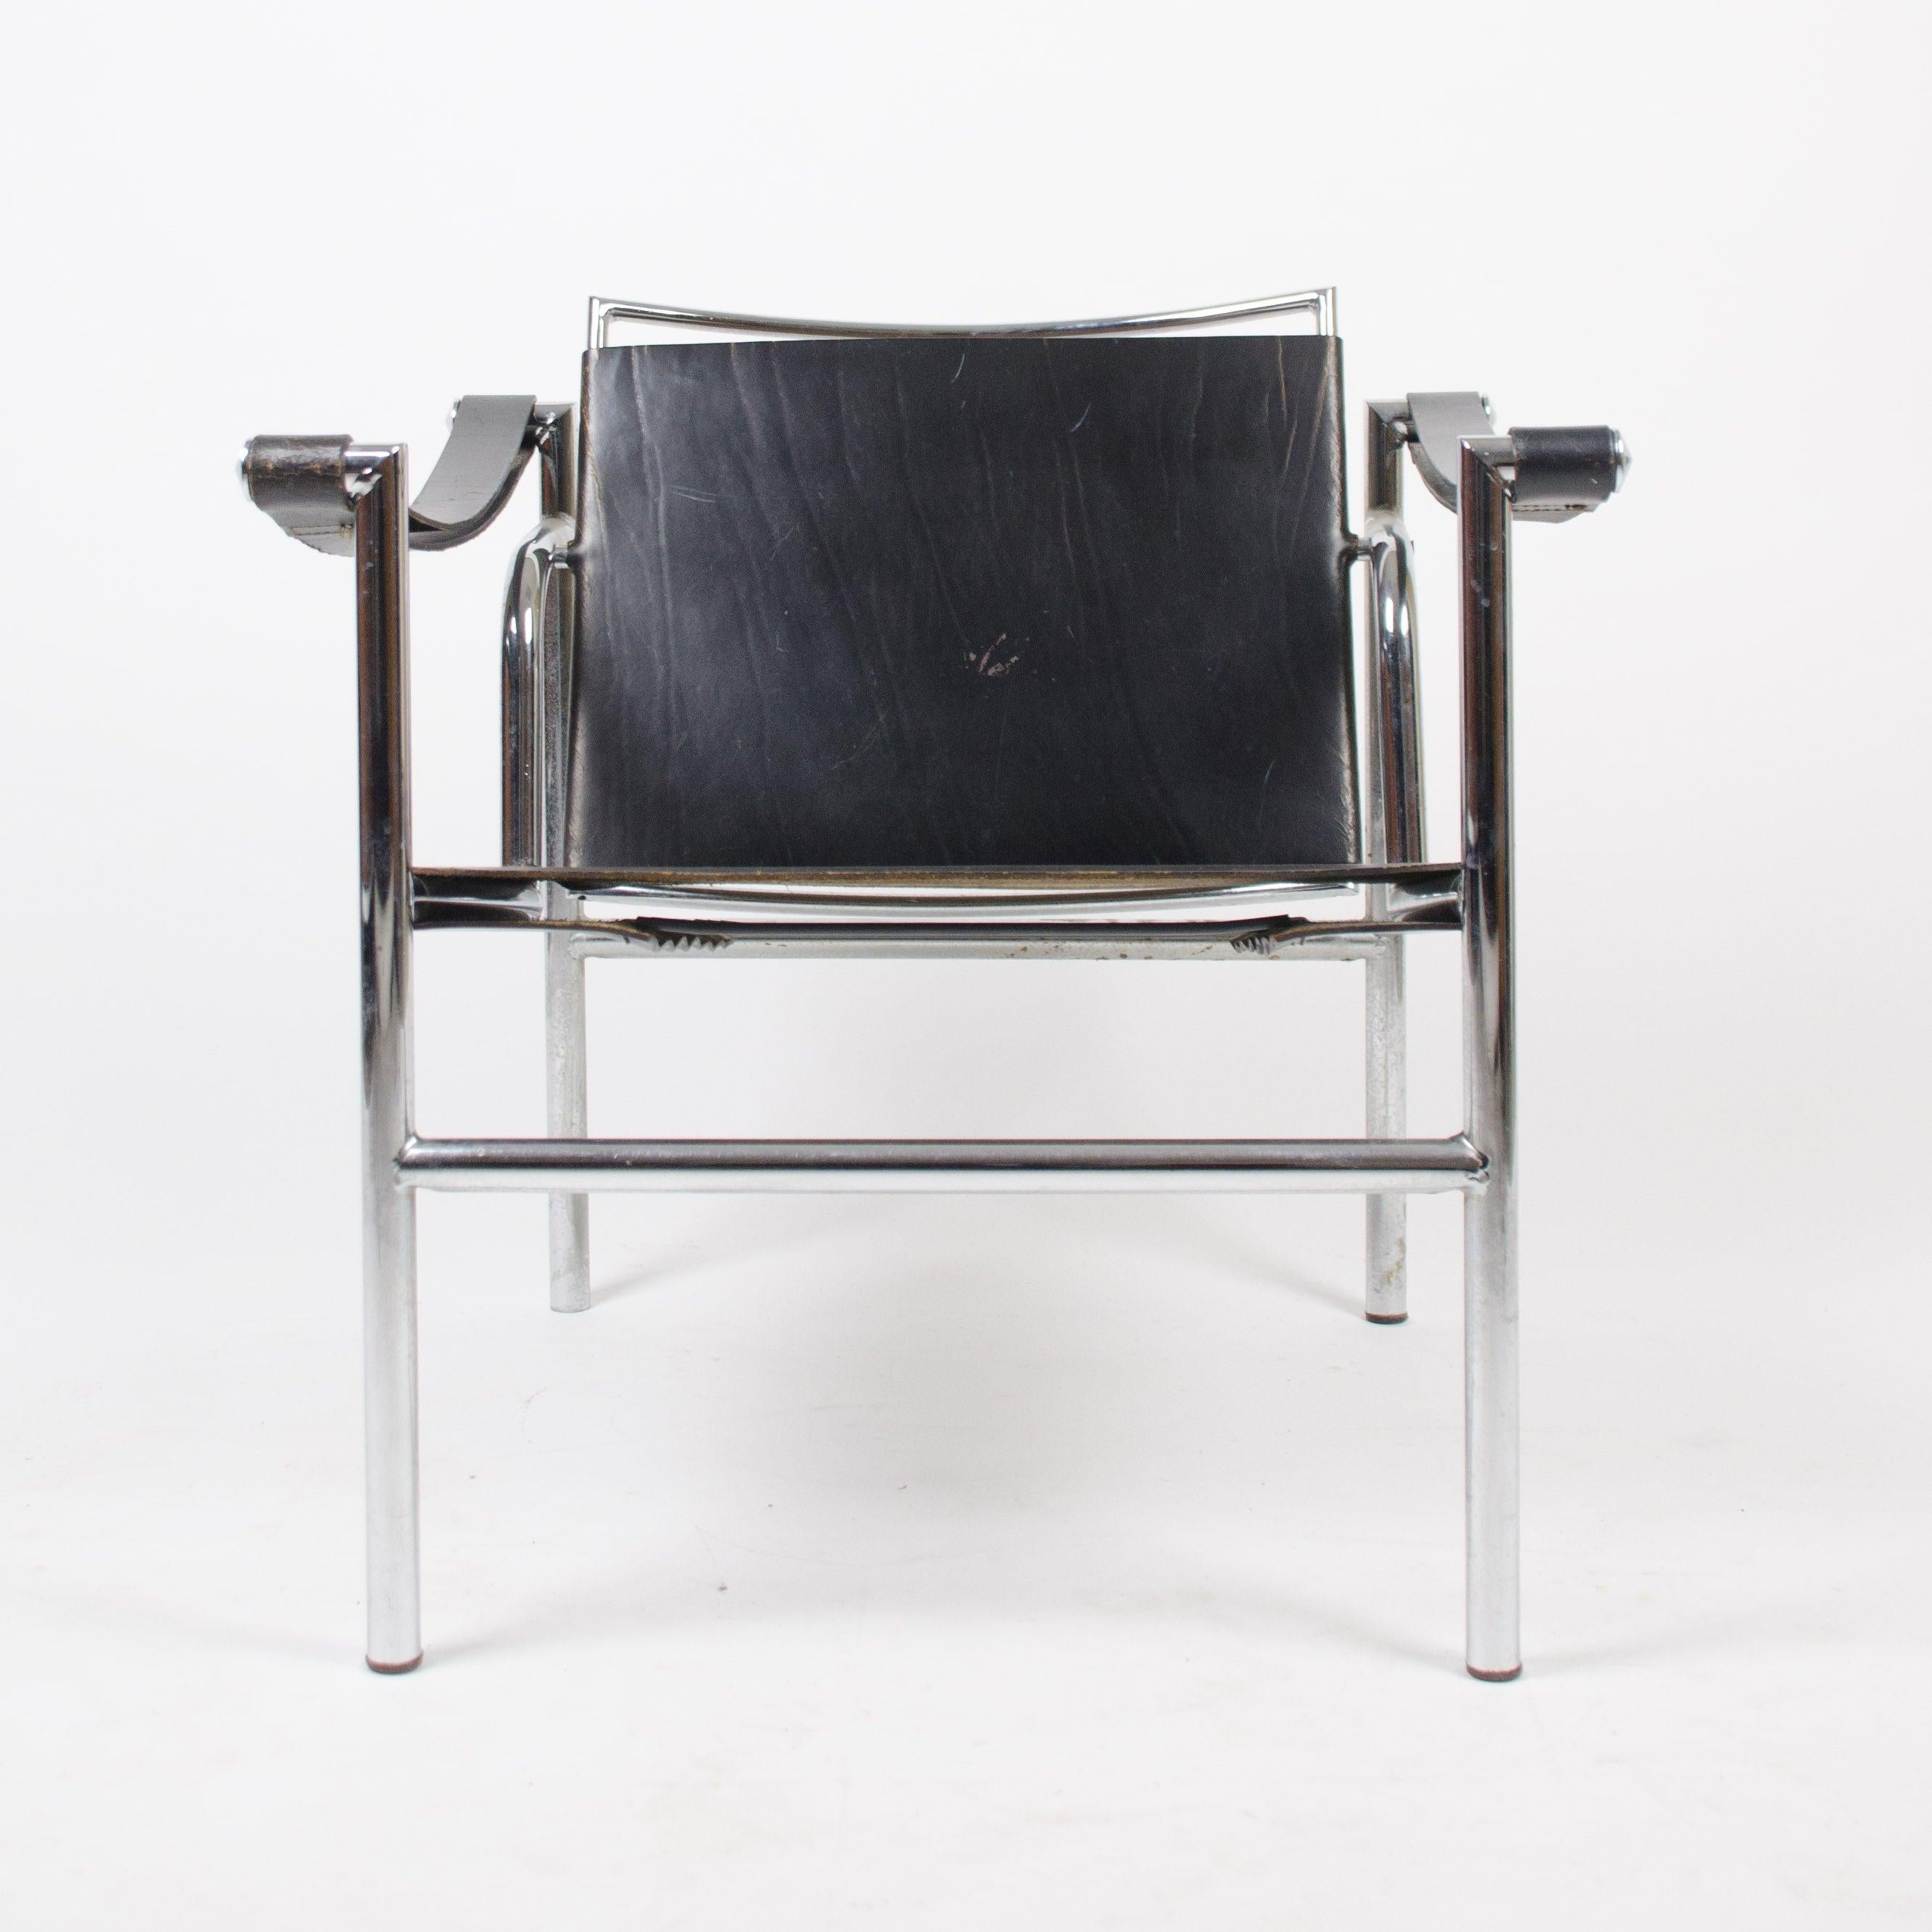 Listed for sale is an original pair of Le Corbusier LC1 Basculant chairs, dating to the 1960's. The chairs are in marvelous and original condition, showing beautiful patina to the leather.

The chairs were acquired from a prominent architect in